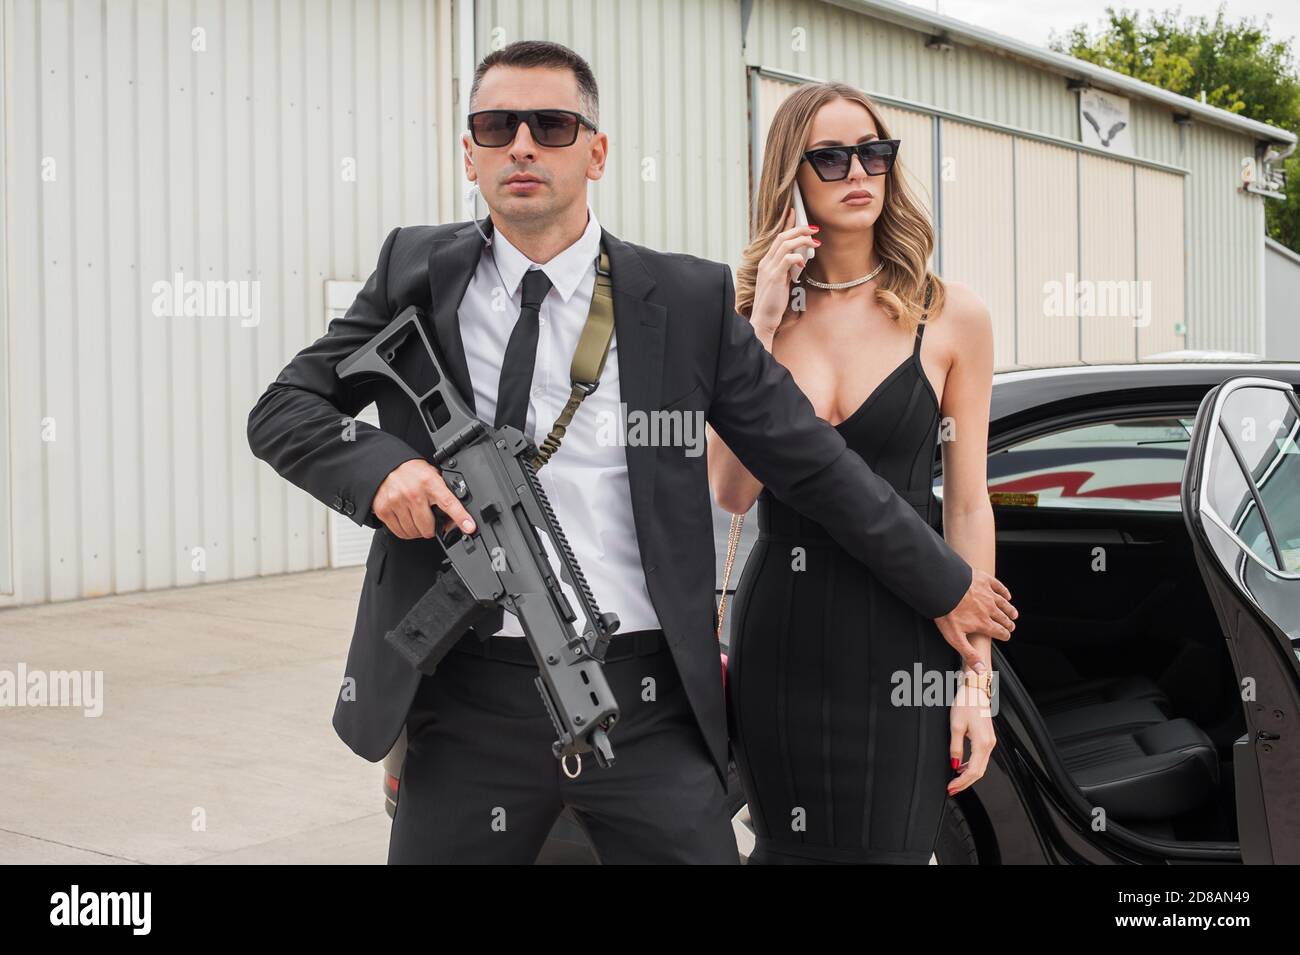 Bodyguards With Guns